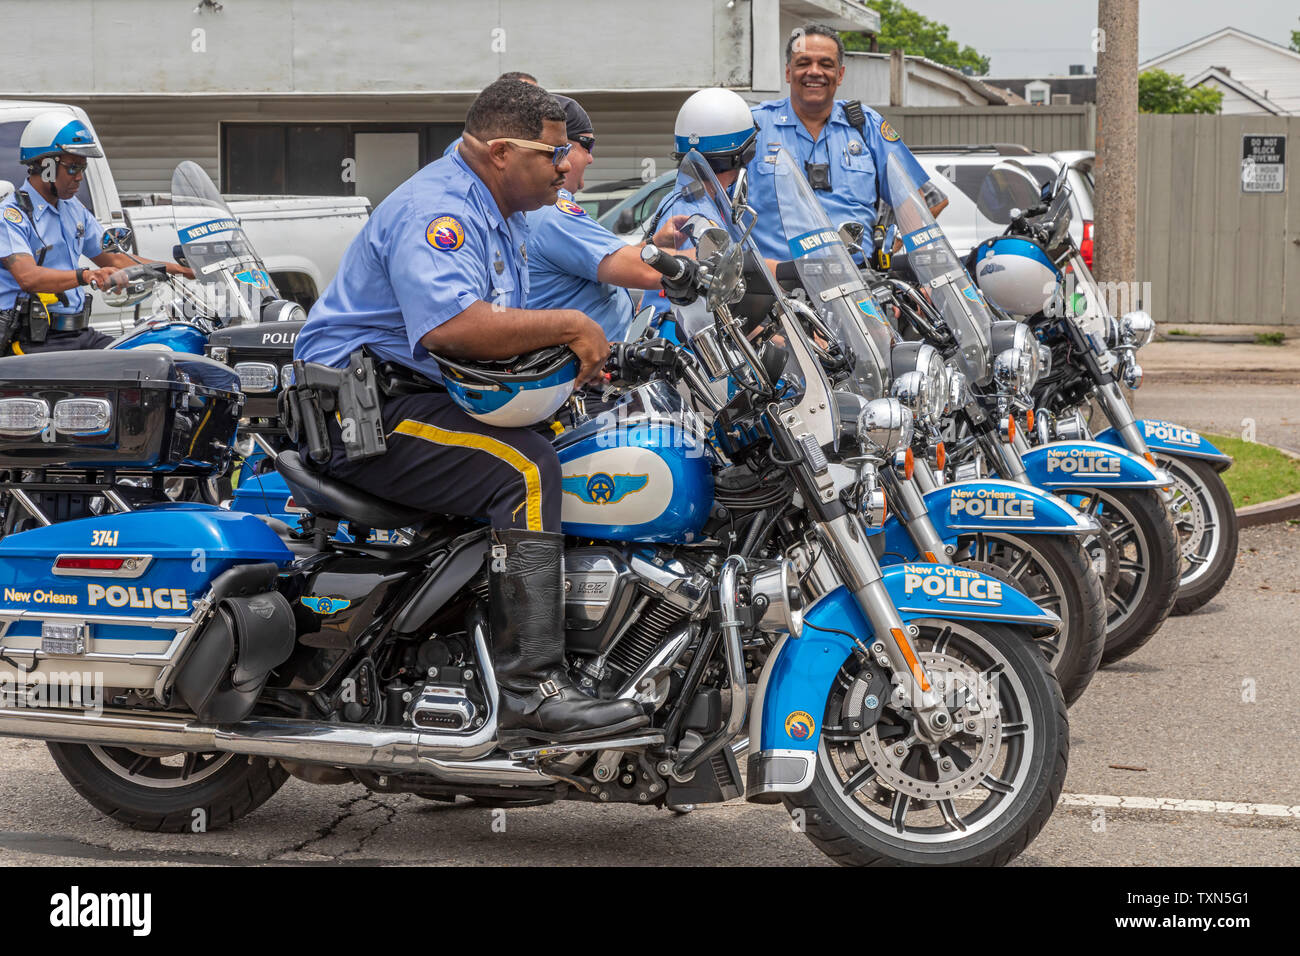 New Orleans, Louisiana - Motorcycle police prepare to direct traffic during a Second Line Parade. Stock Photo